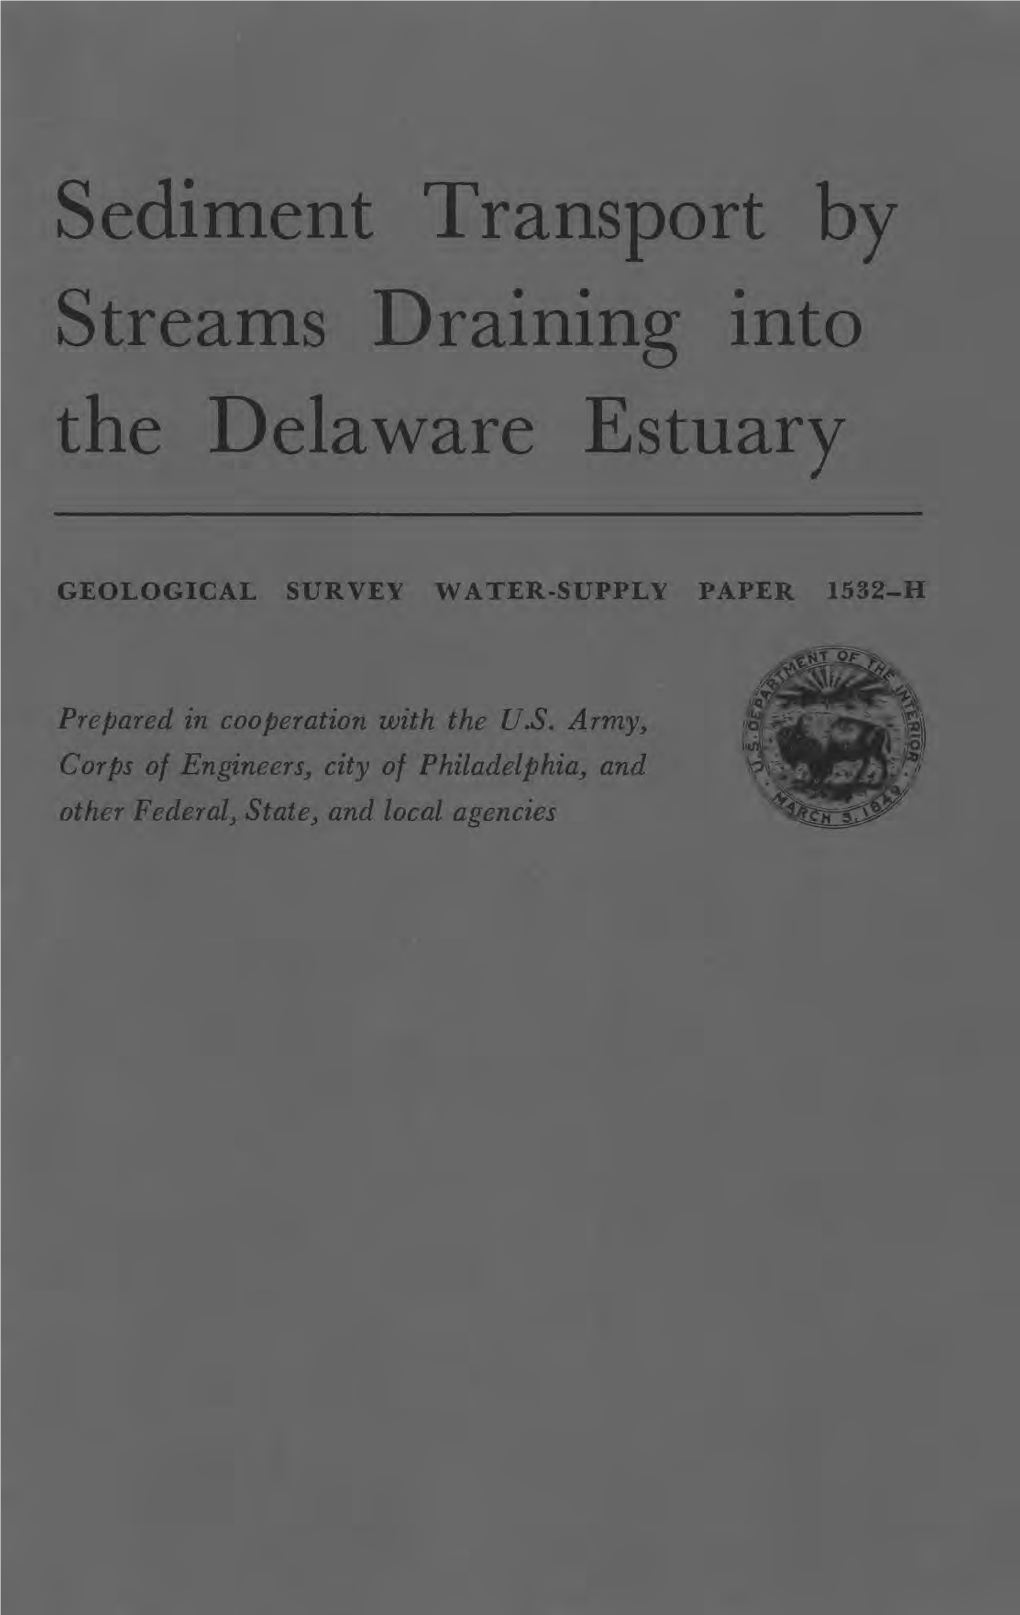 Sediment Transport by Streams Draining Into the Delaware Estuary